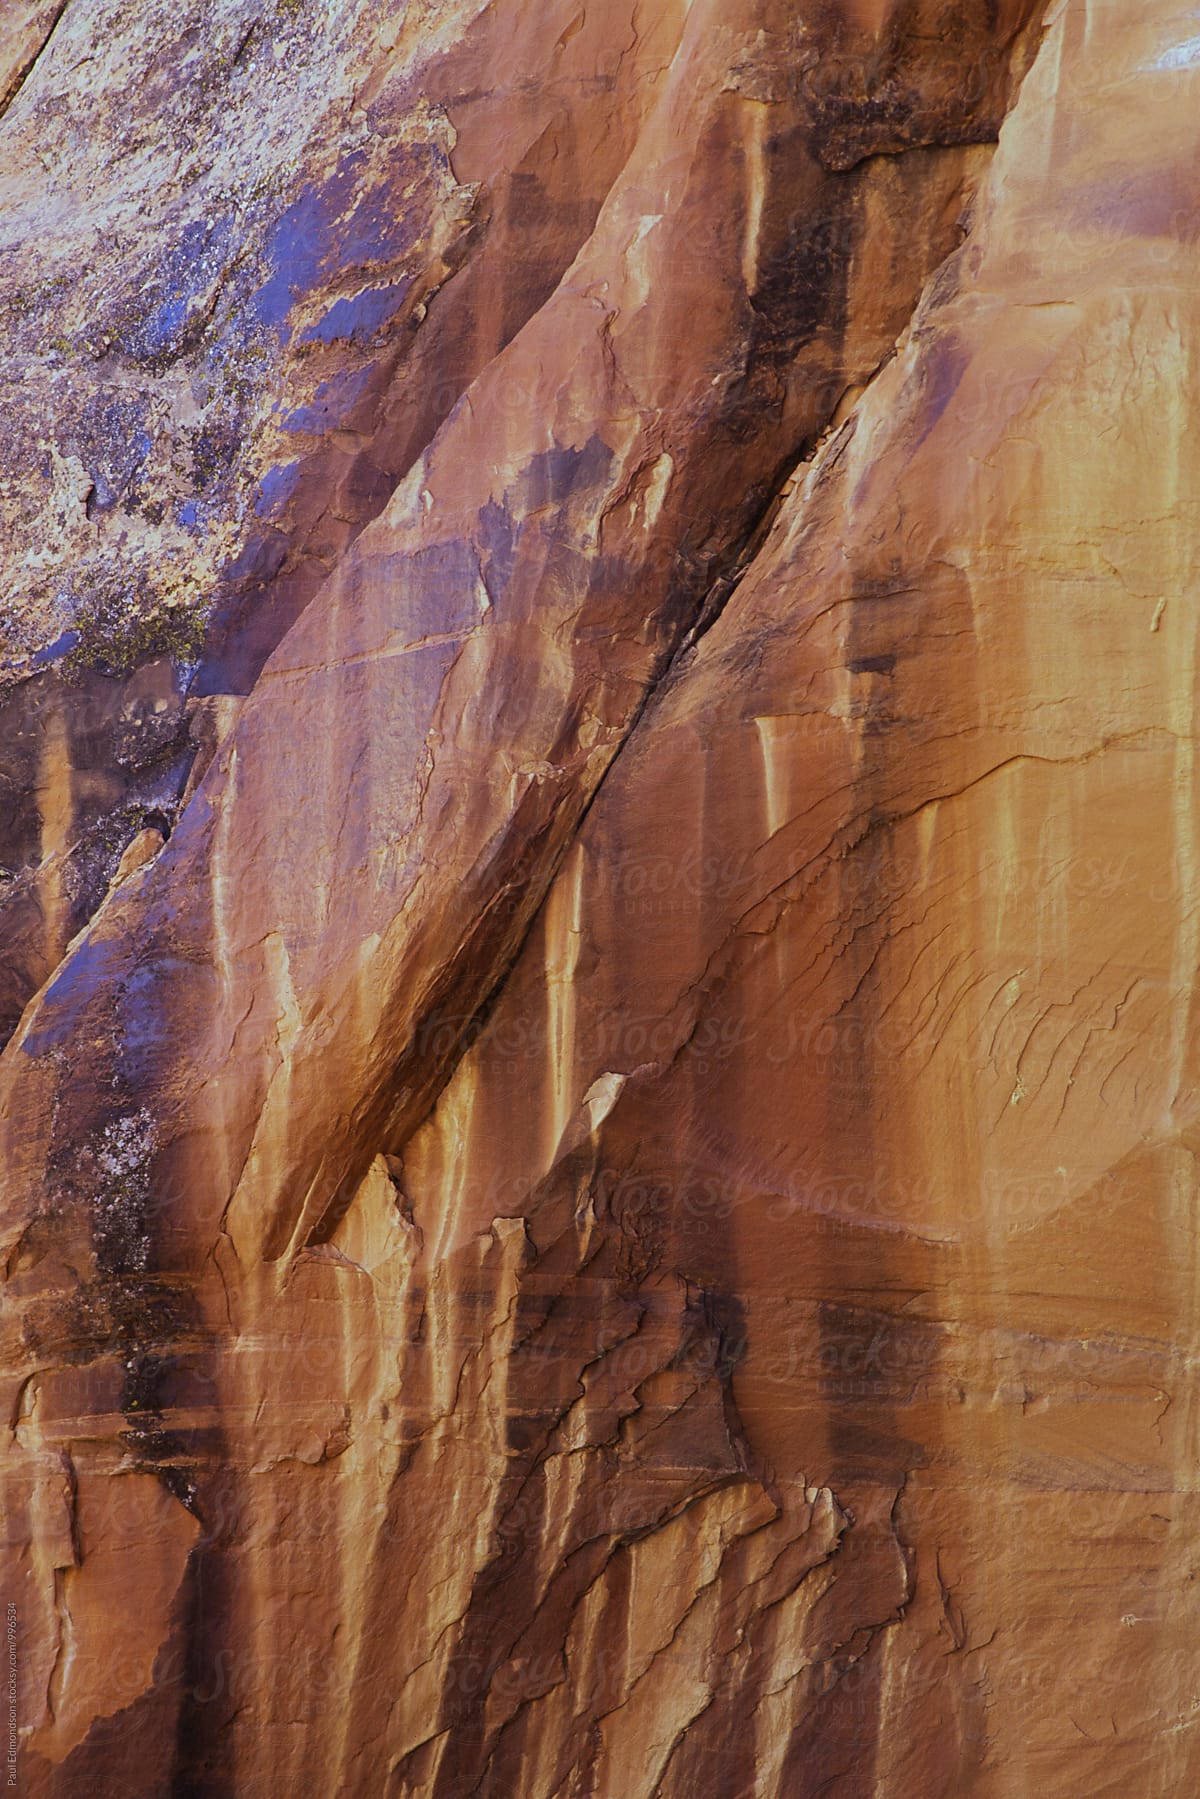 Stained sandstone walls in Coyote Gulch